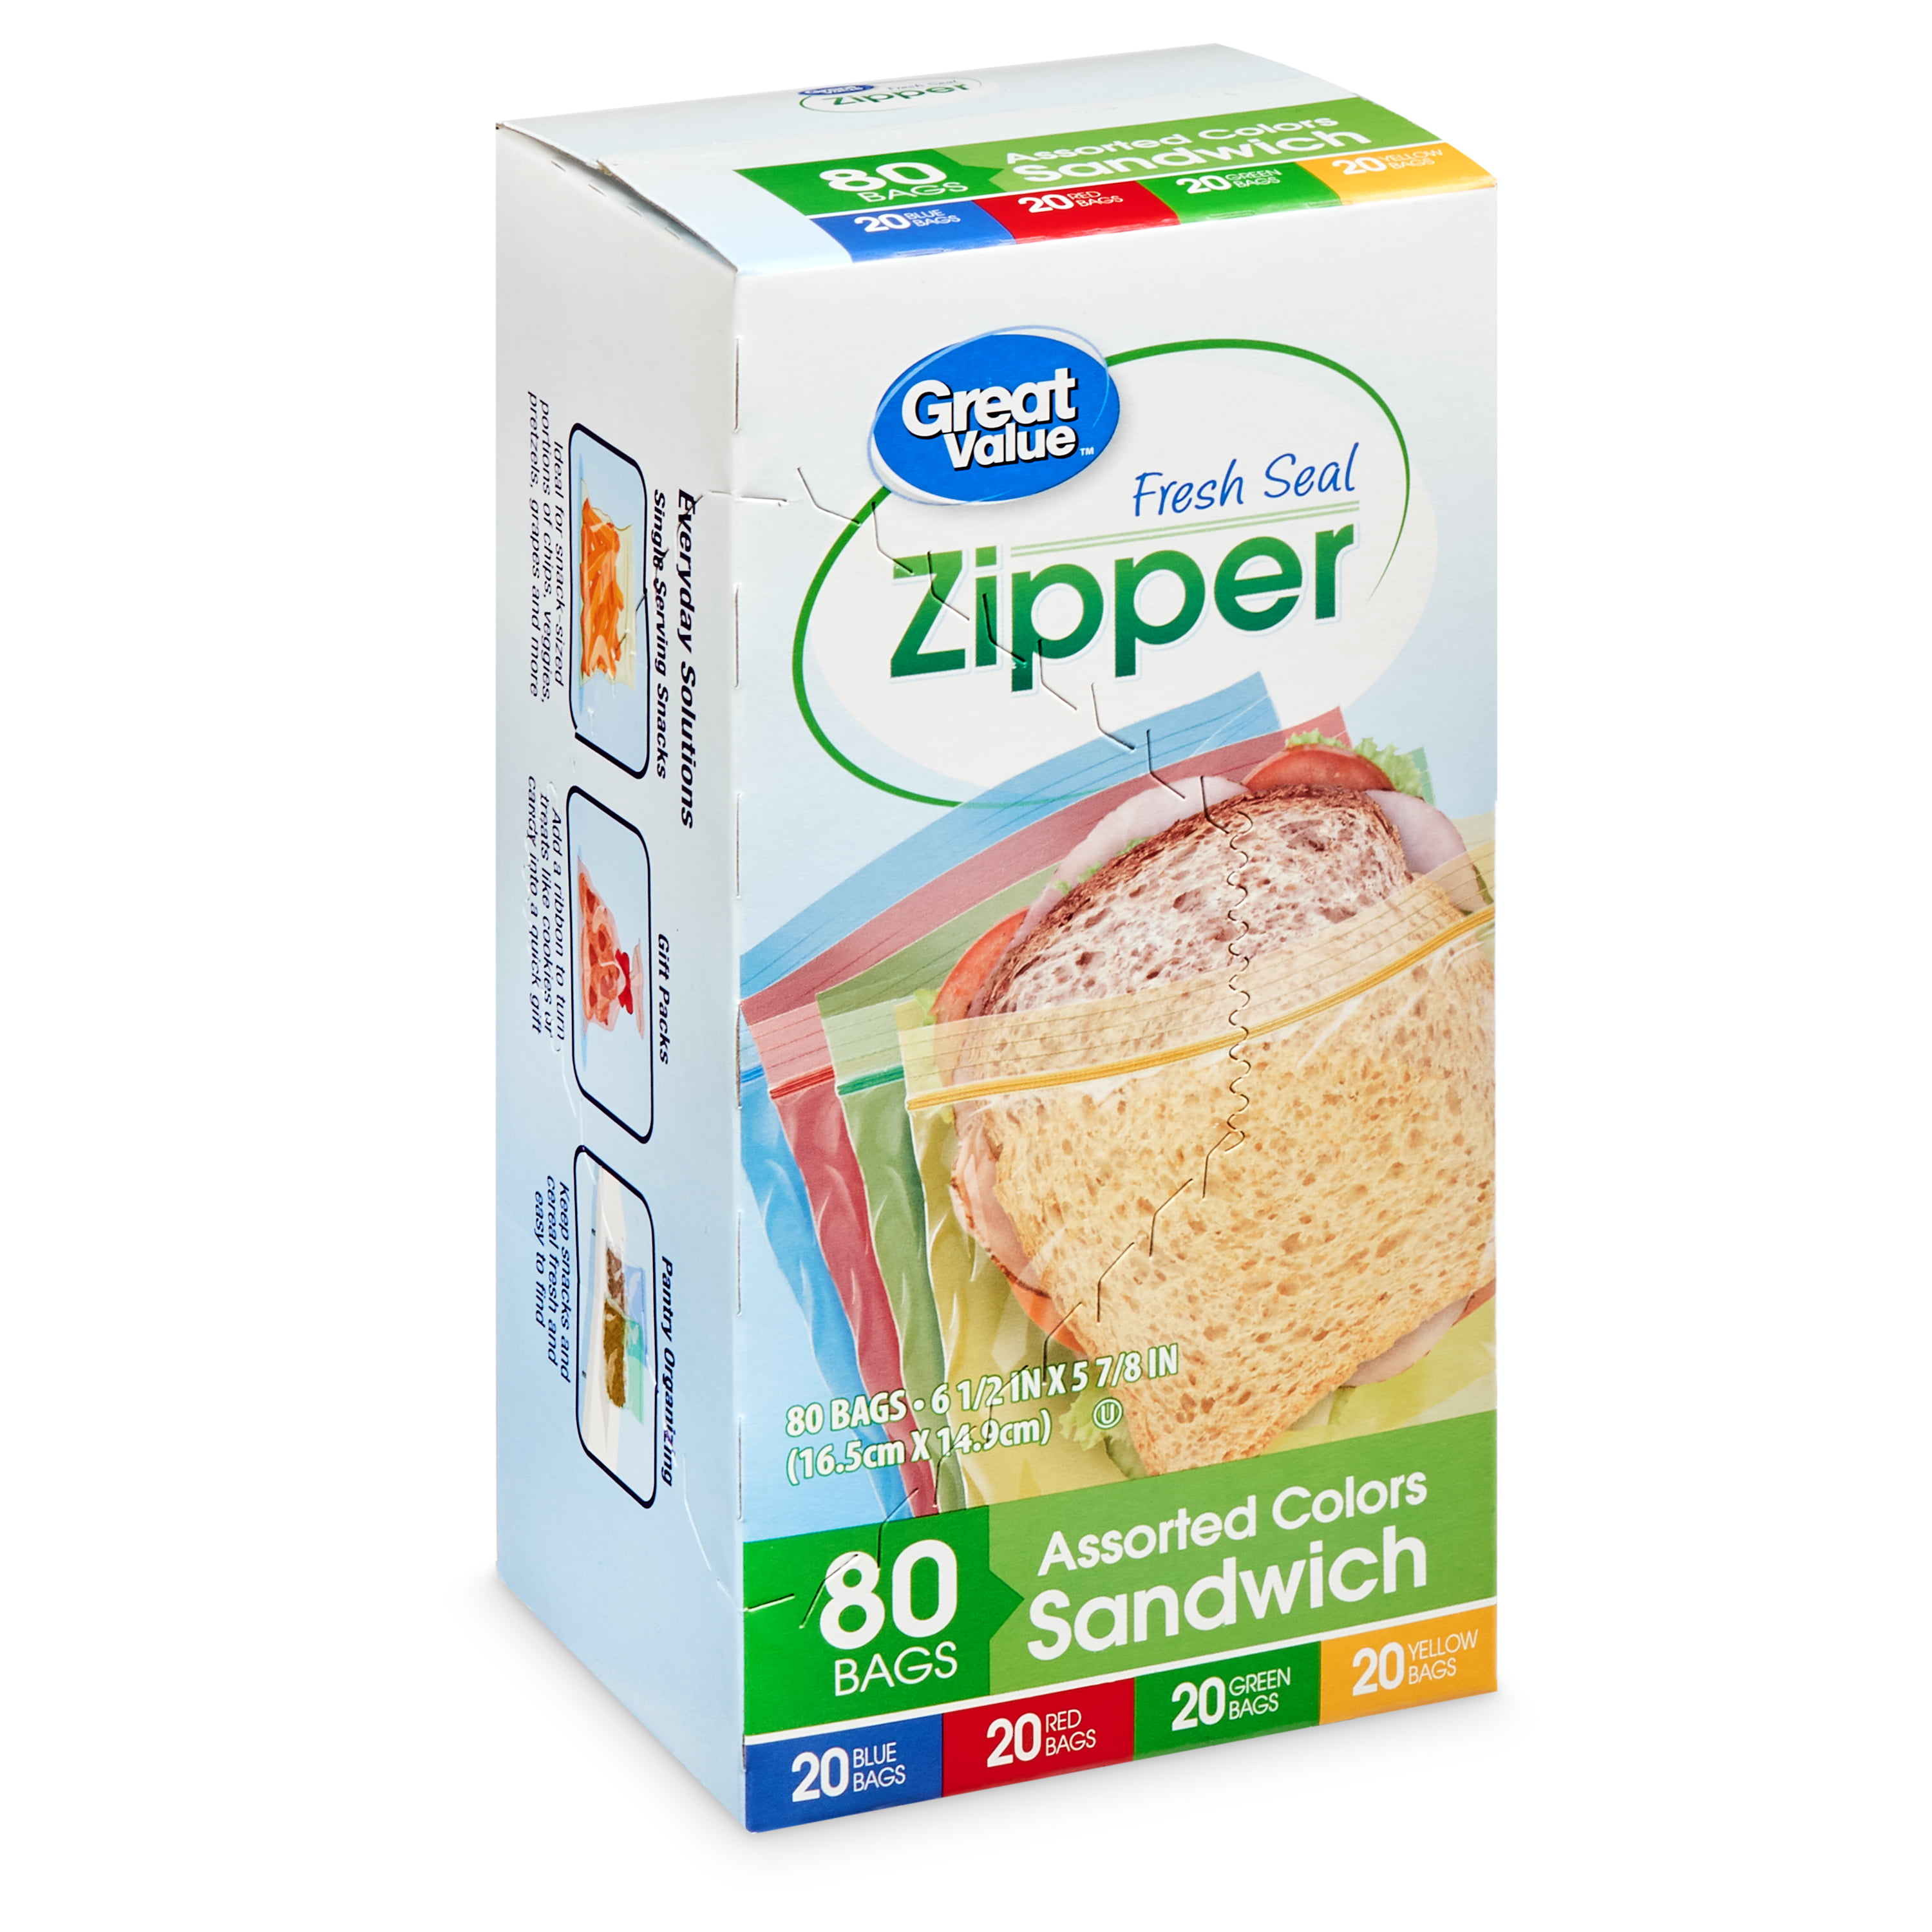 Great Value Fresh Seal Zipper Sandwich Bags, 80 Count, Assorted Colors ...